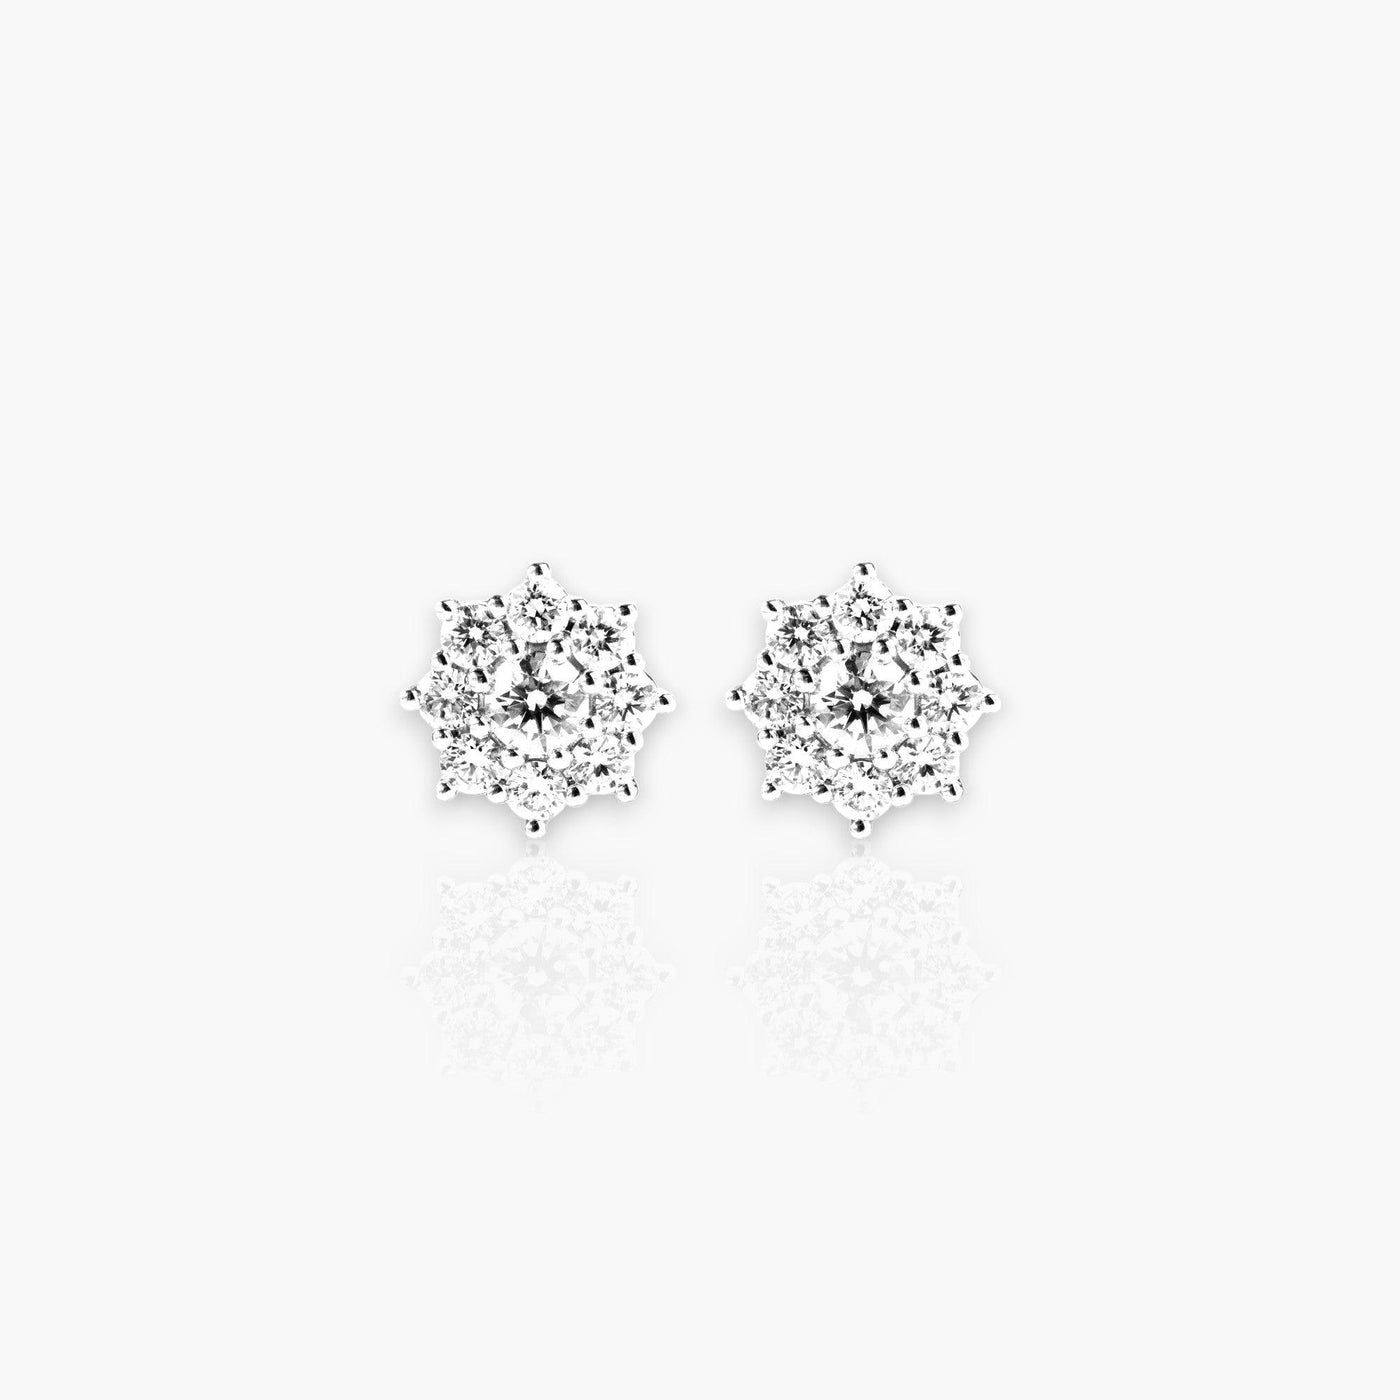 Earrings, White Gold and 18 Diamonds (Octagon flower) - Moregola Fine Jewelry